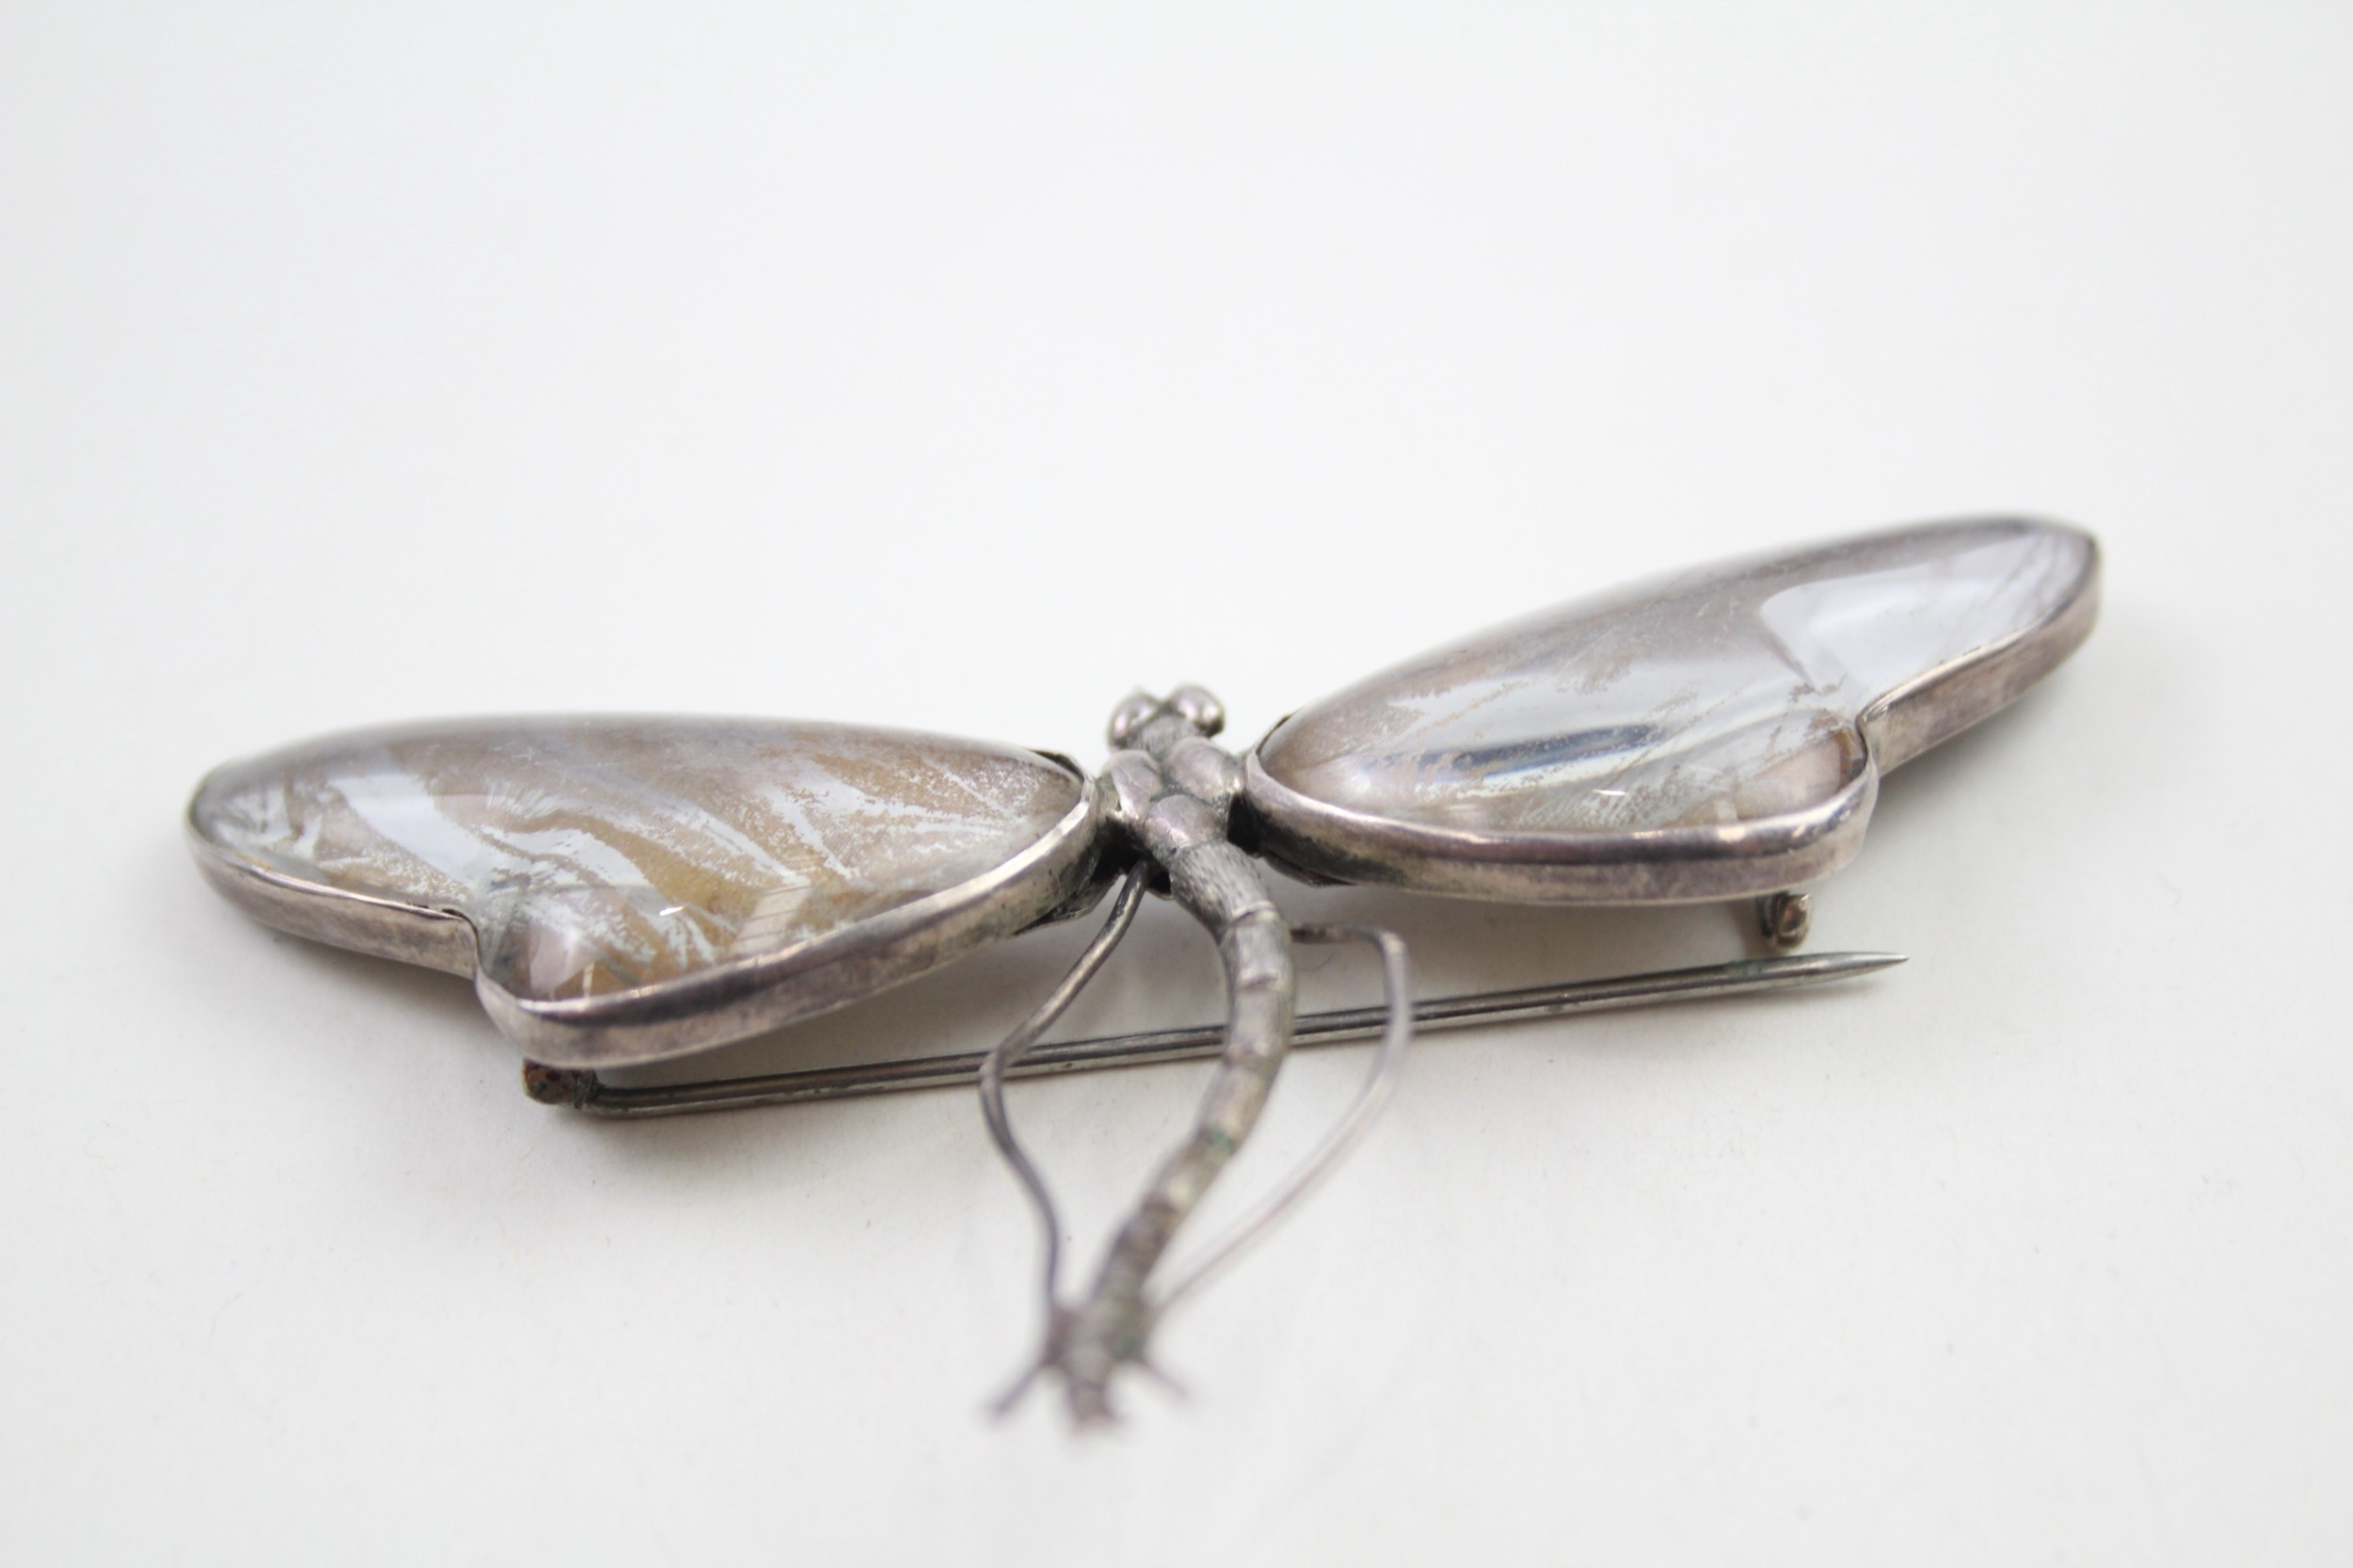 Silver vintage butterfly wing set dragonfly brooch (19g) - Image 6 of 9